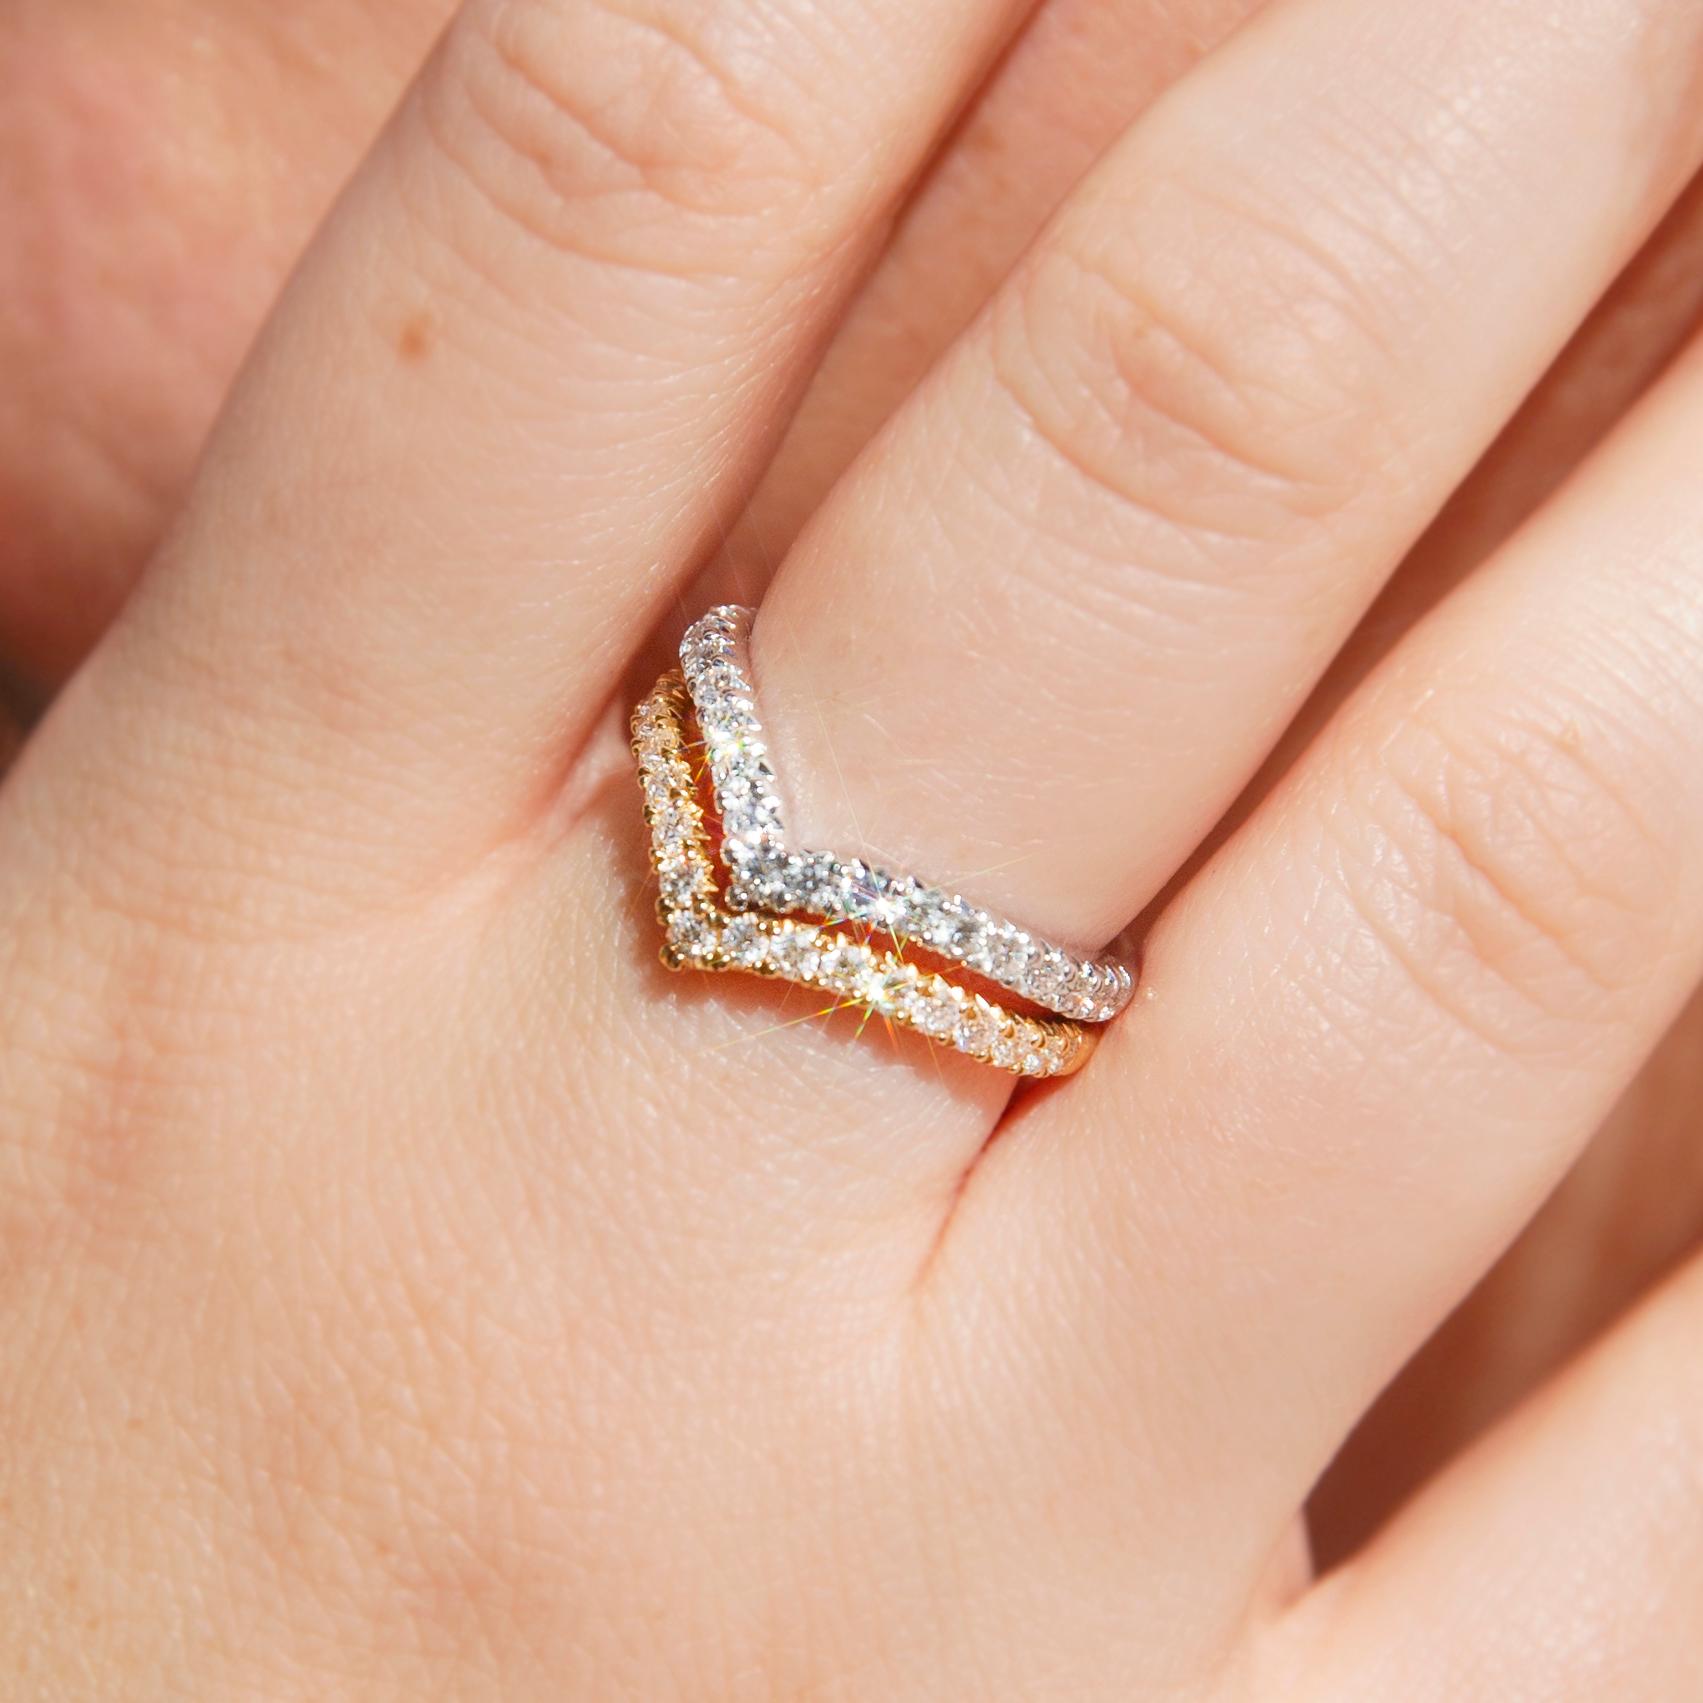 Crafted in 18 carat white gold, this light contemporary ring features a chevron setting set with nineteen glistening round brilliant diamonds. The Rhada Ring makes a seamless transition from day to night and looks wonderful alone or stacked with